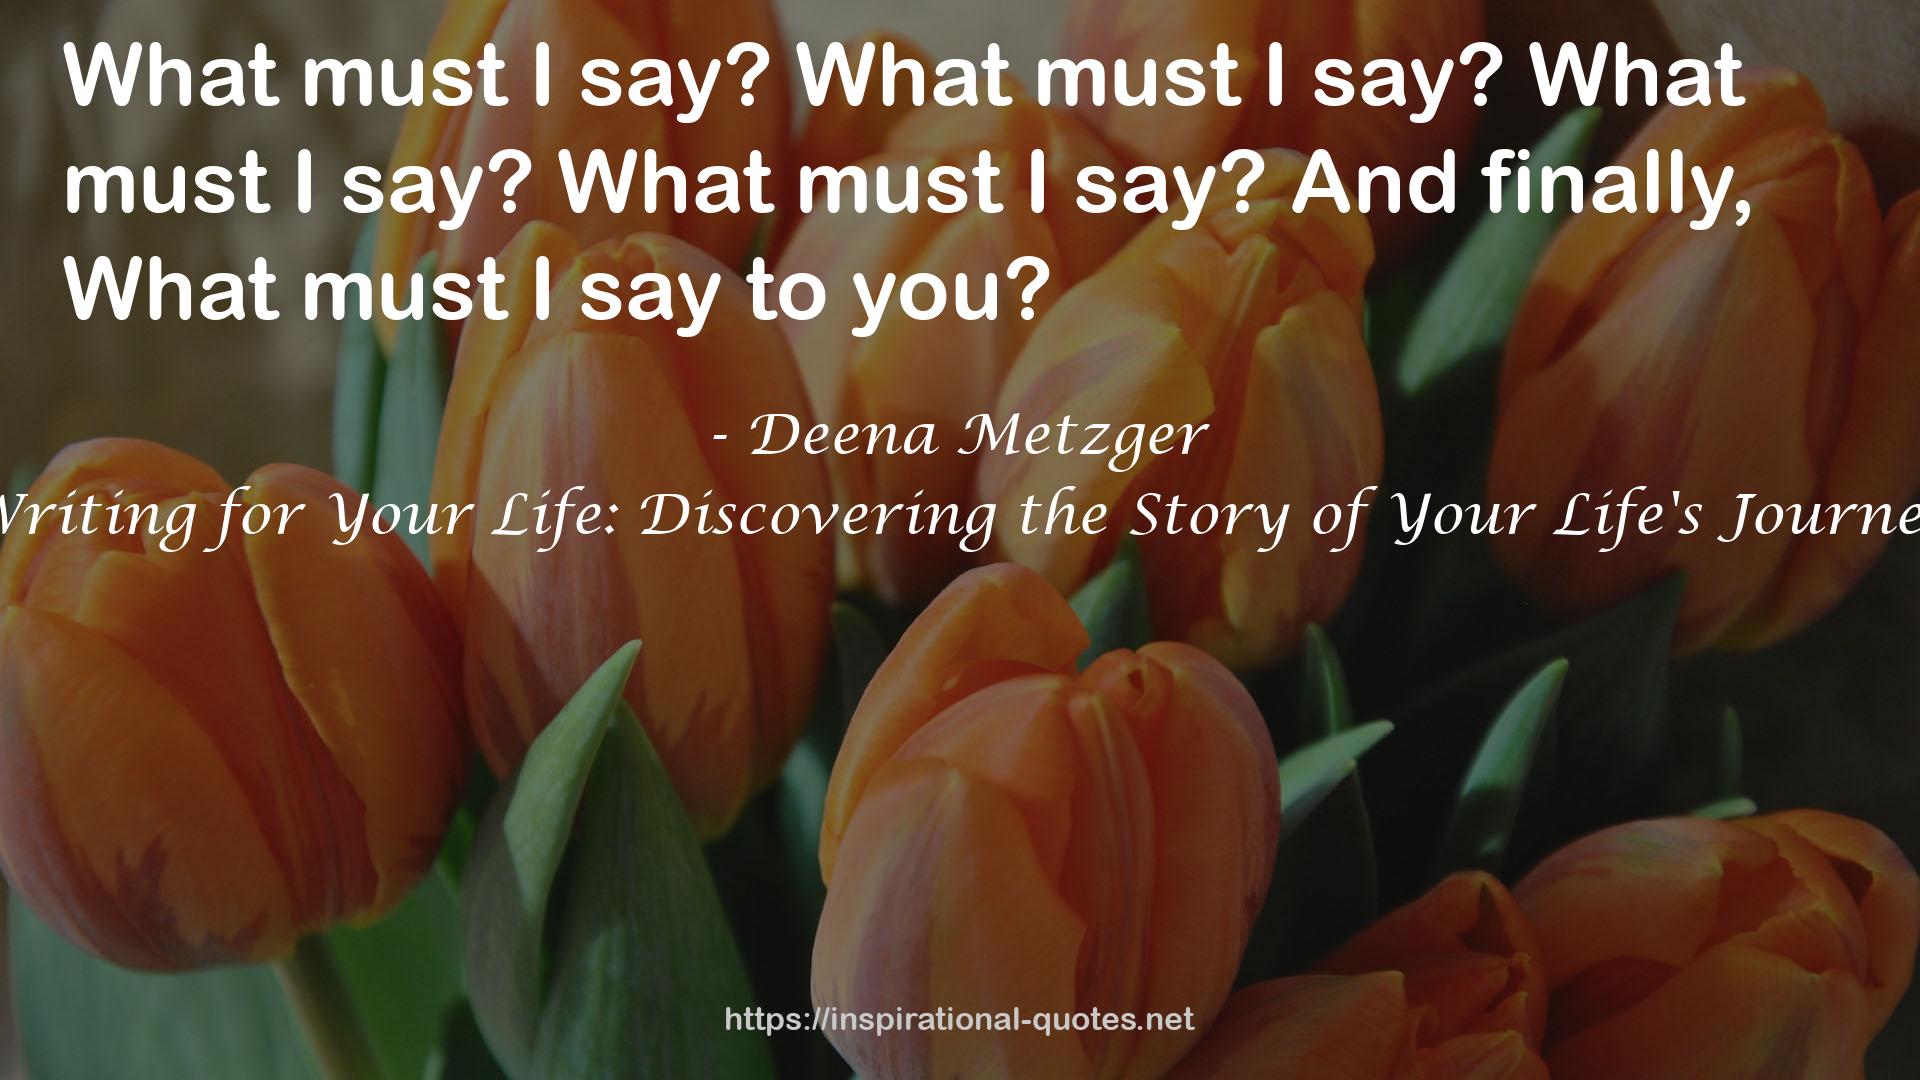 Writing for Your Life: Discovering the Story of Your Life's Journey QUOTES